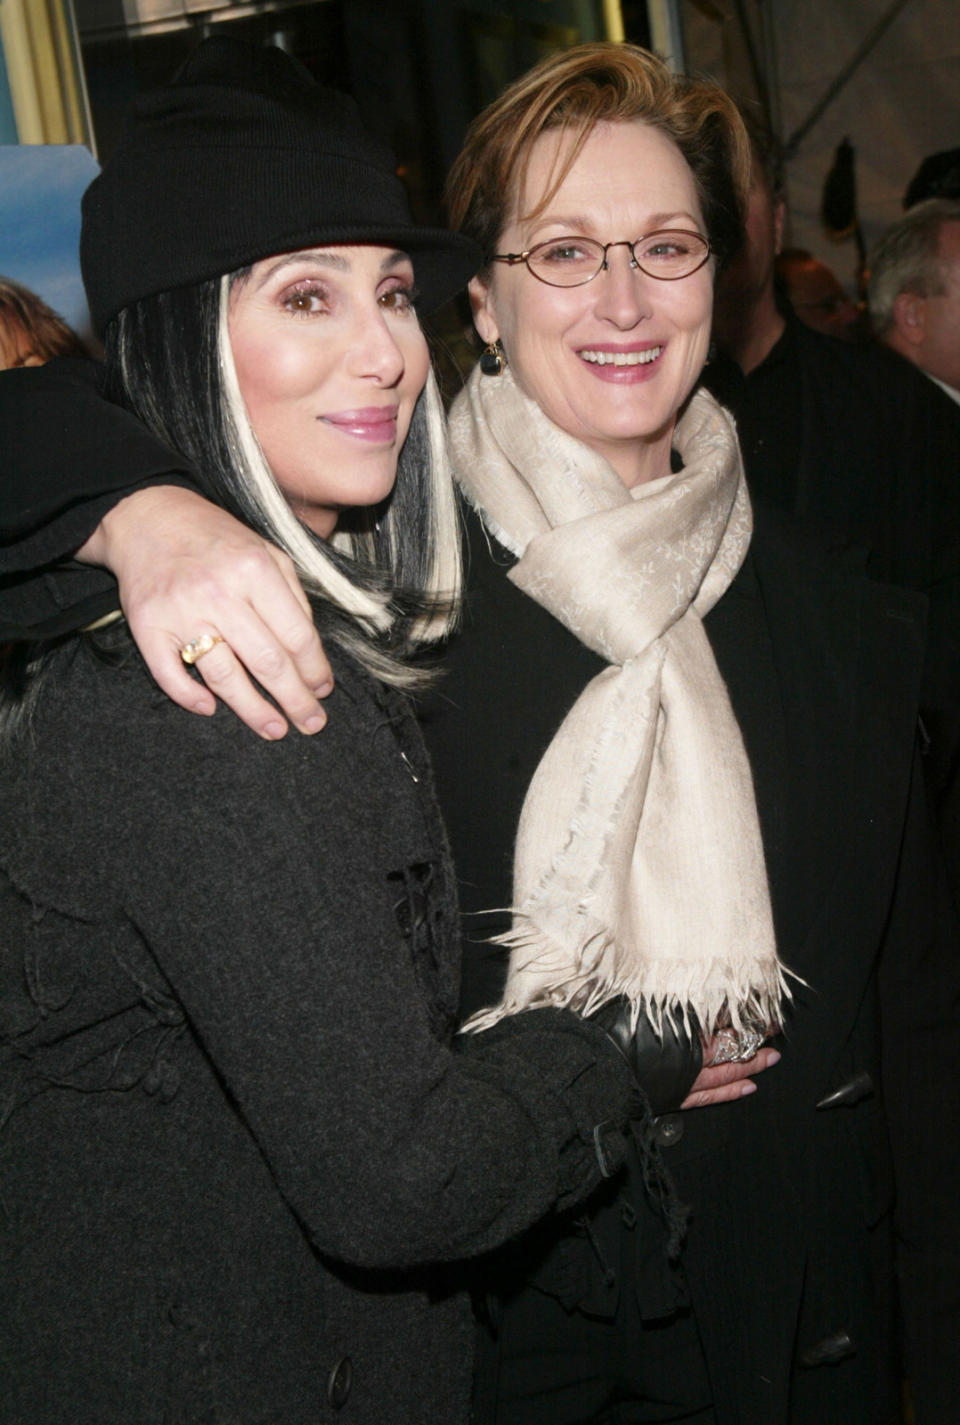 Cher and Meryl starred in 1983 thriller Silkwood.